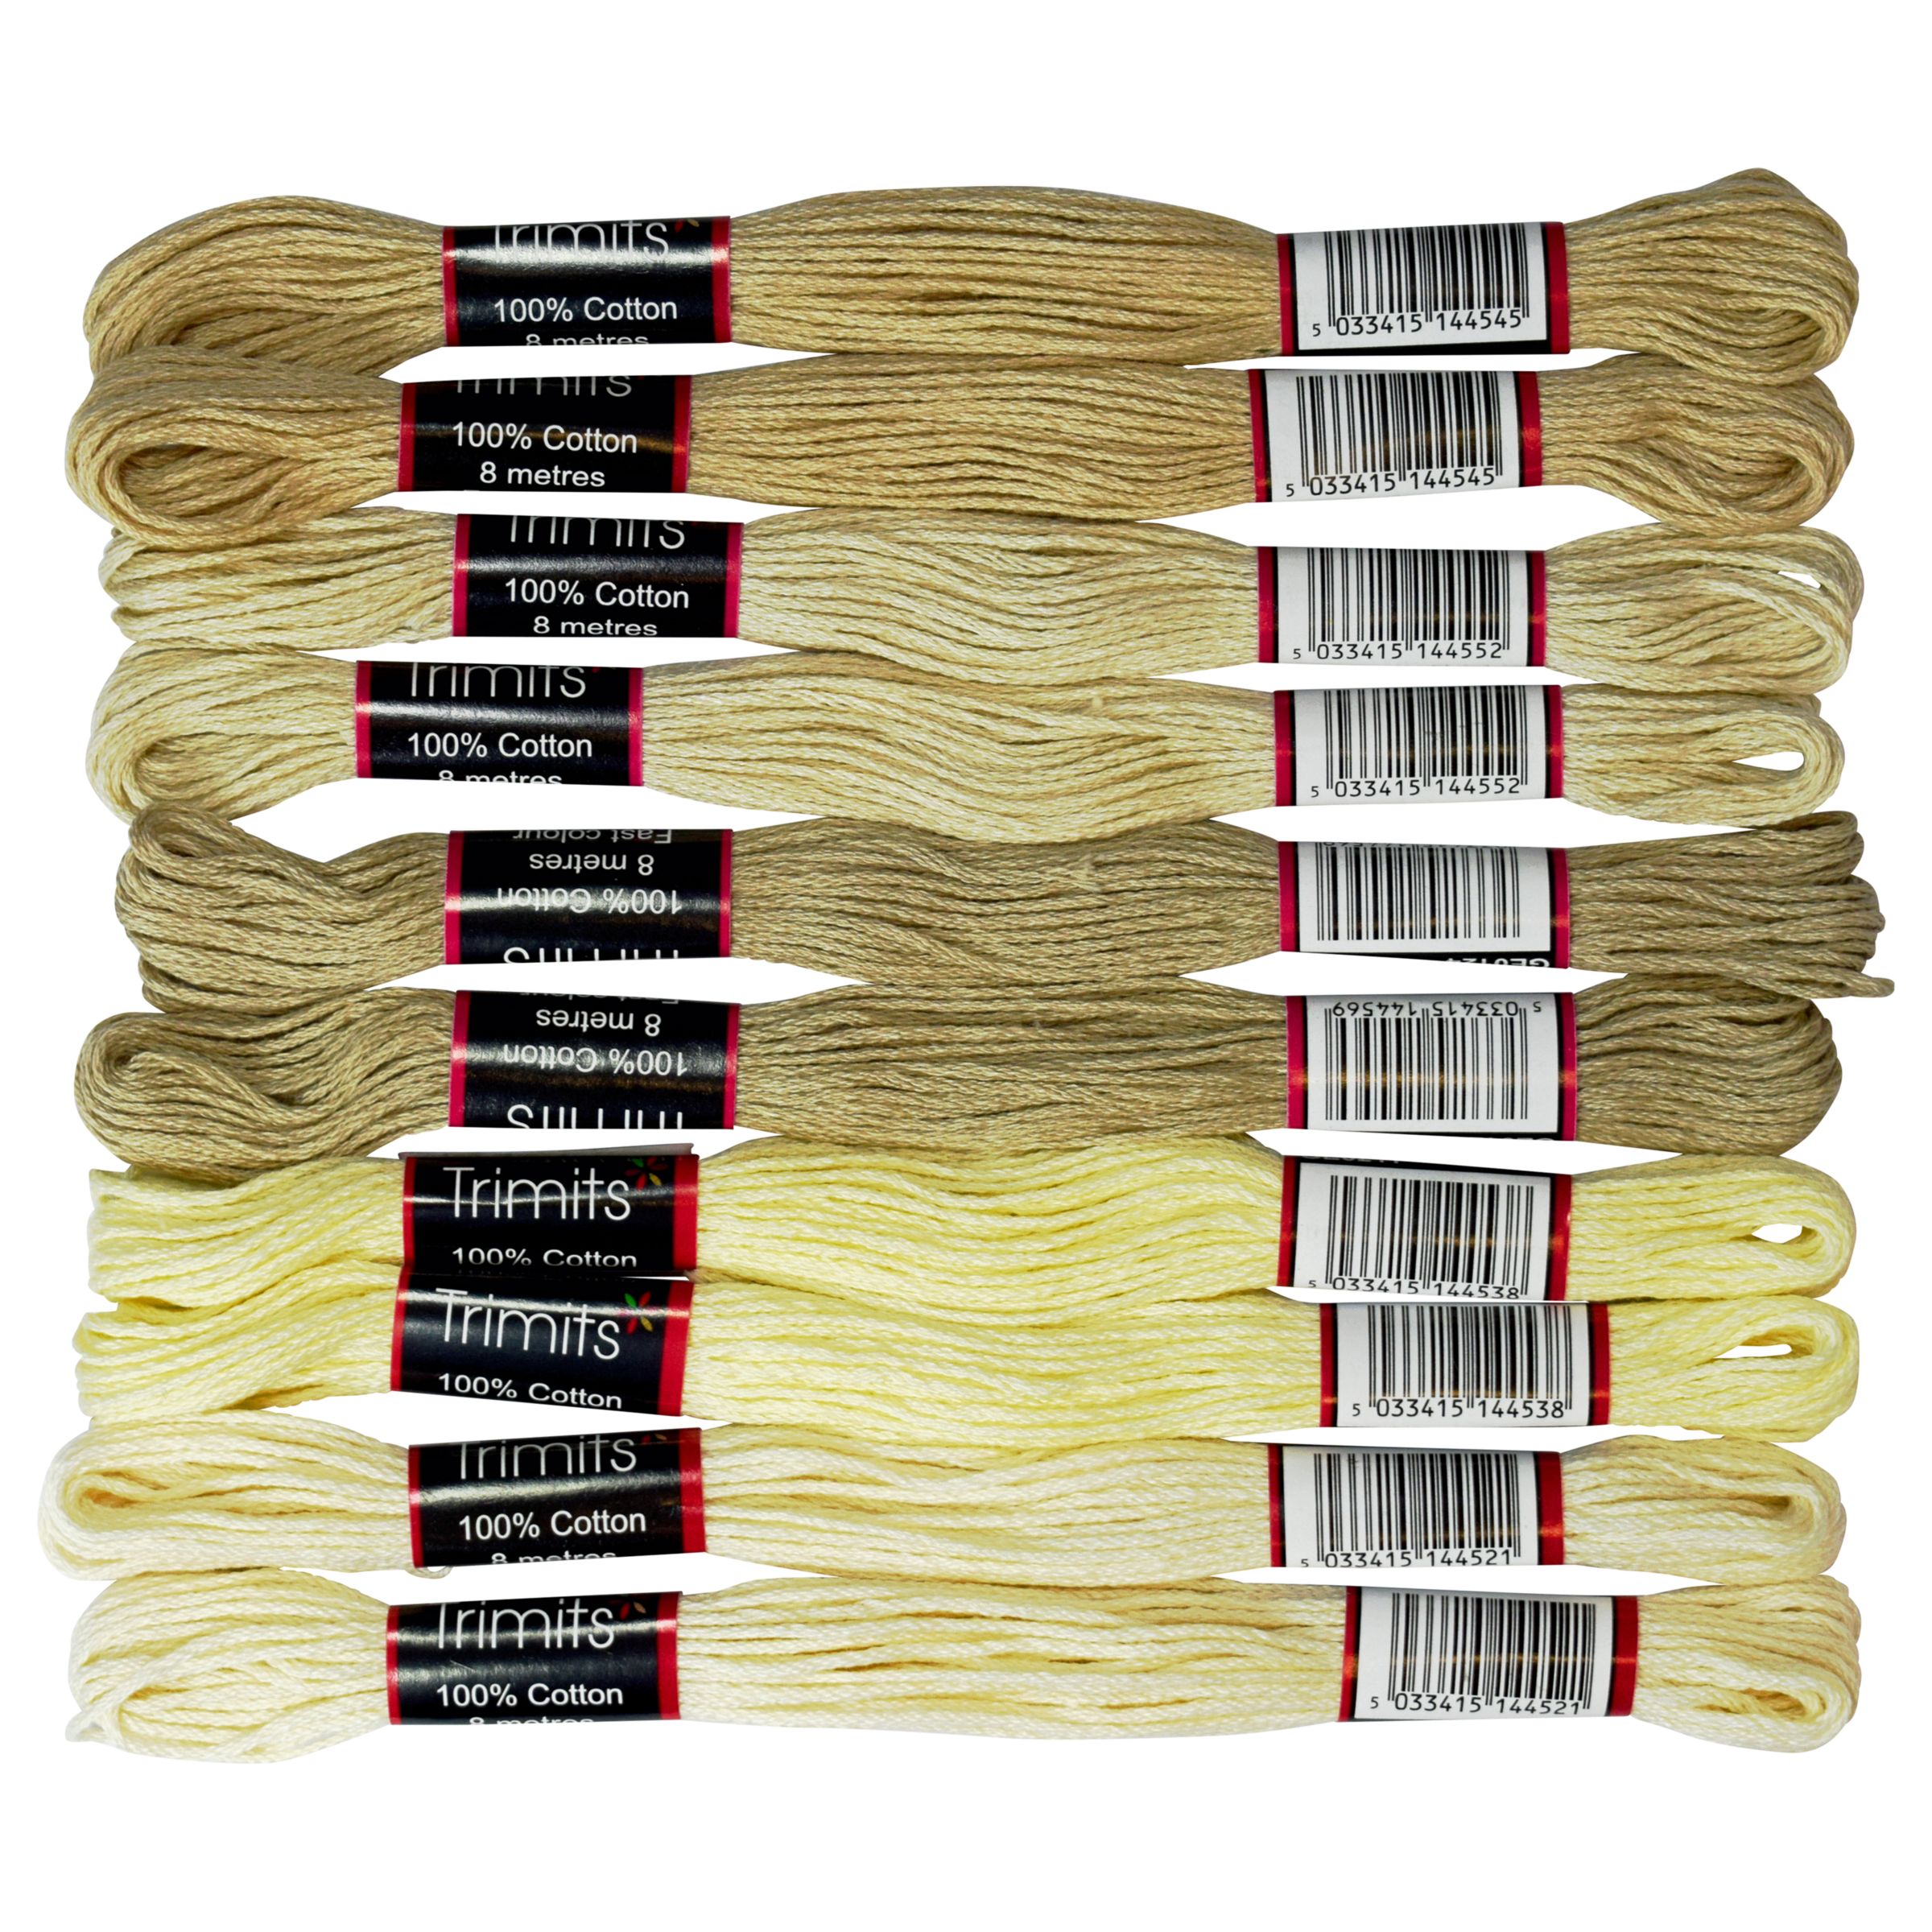 Habico Embroidery Threads, 10 Skeins